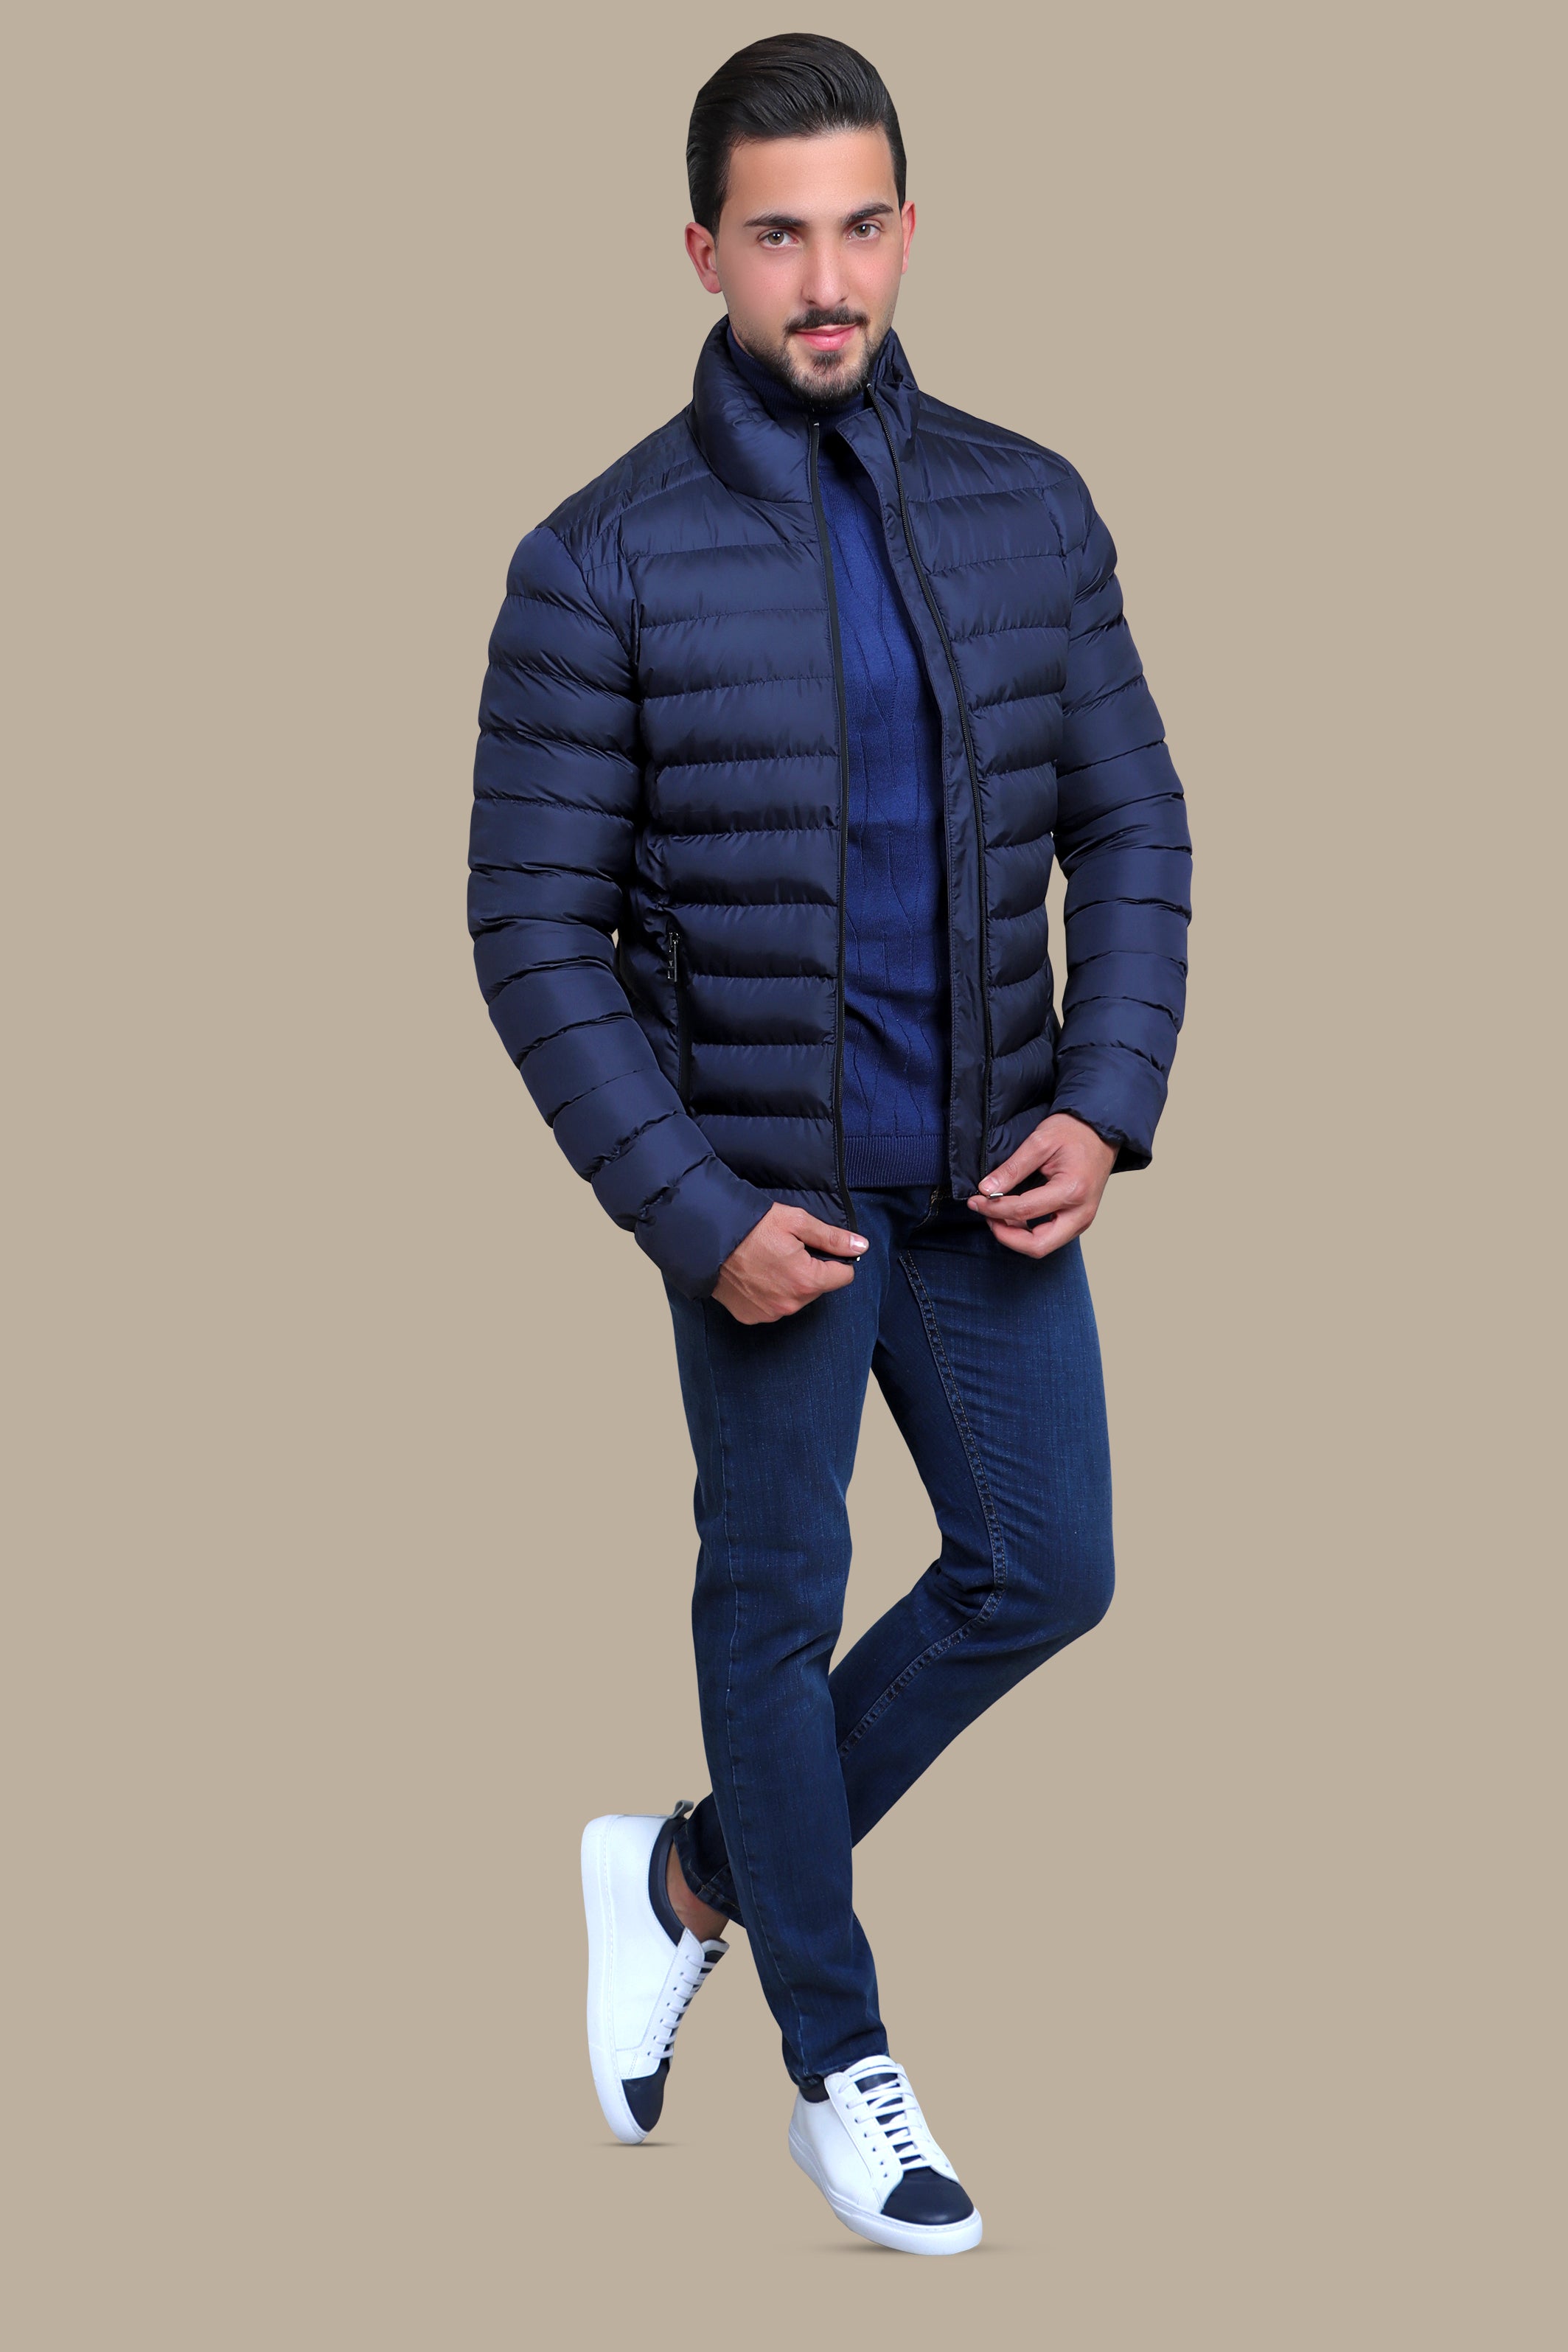 Navy Bliss: Puffer Padded Jacket for Stylish Warmth